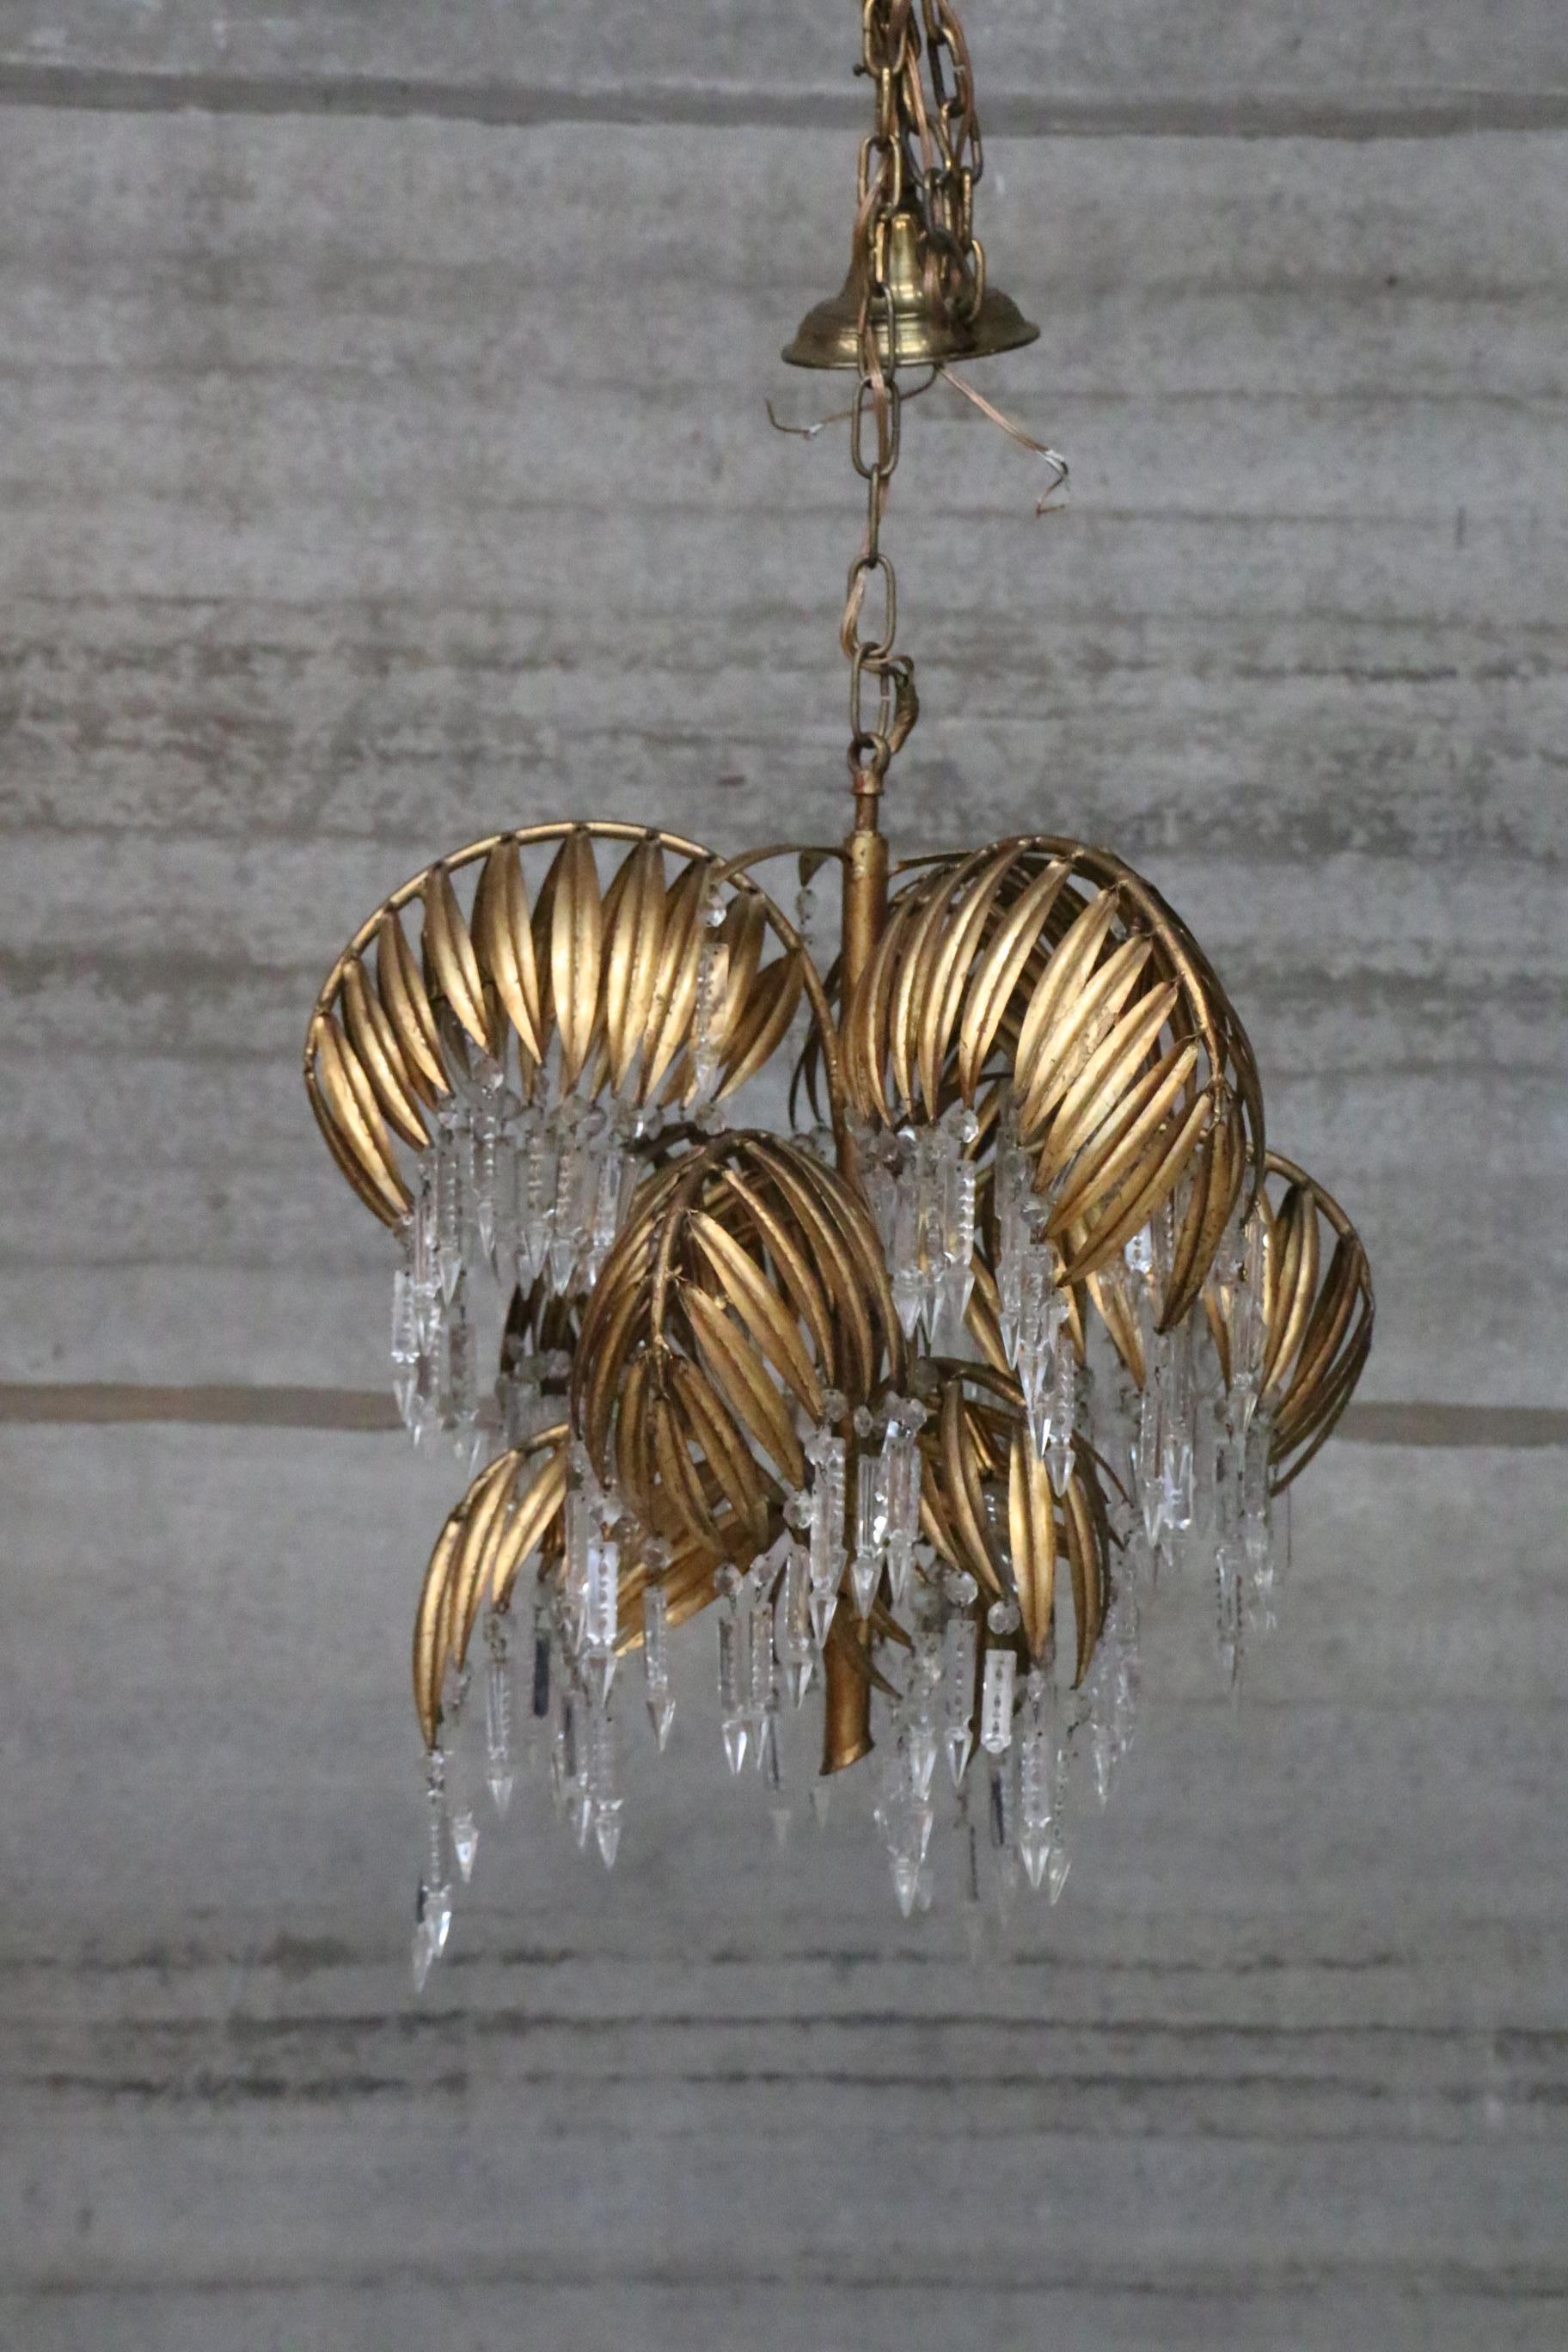 Anglo-Japanese Rare Maison Jansen Palm Tree Chandelier with Glass Cones and Palm Leaves